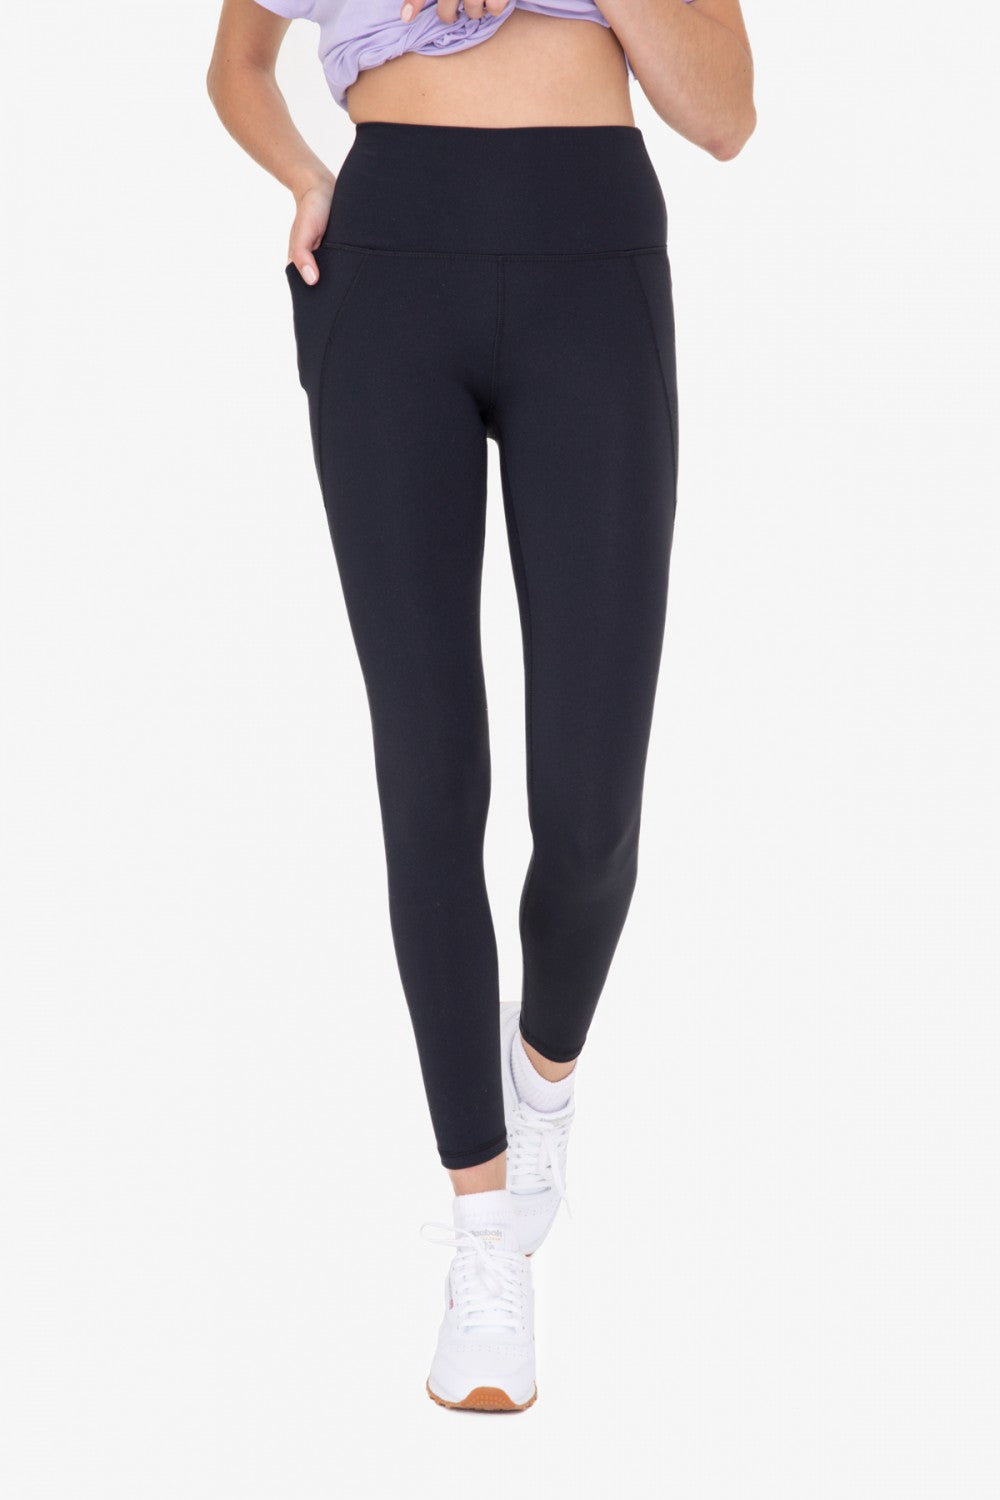 Tummy Control Tapered Essential Black Highwaist Leggings with Pockets